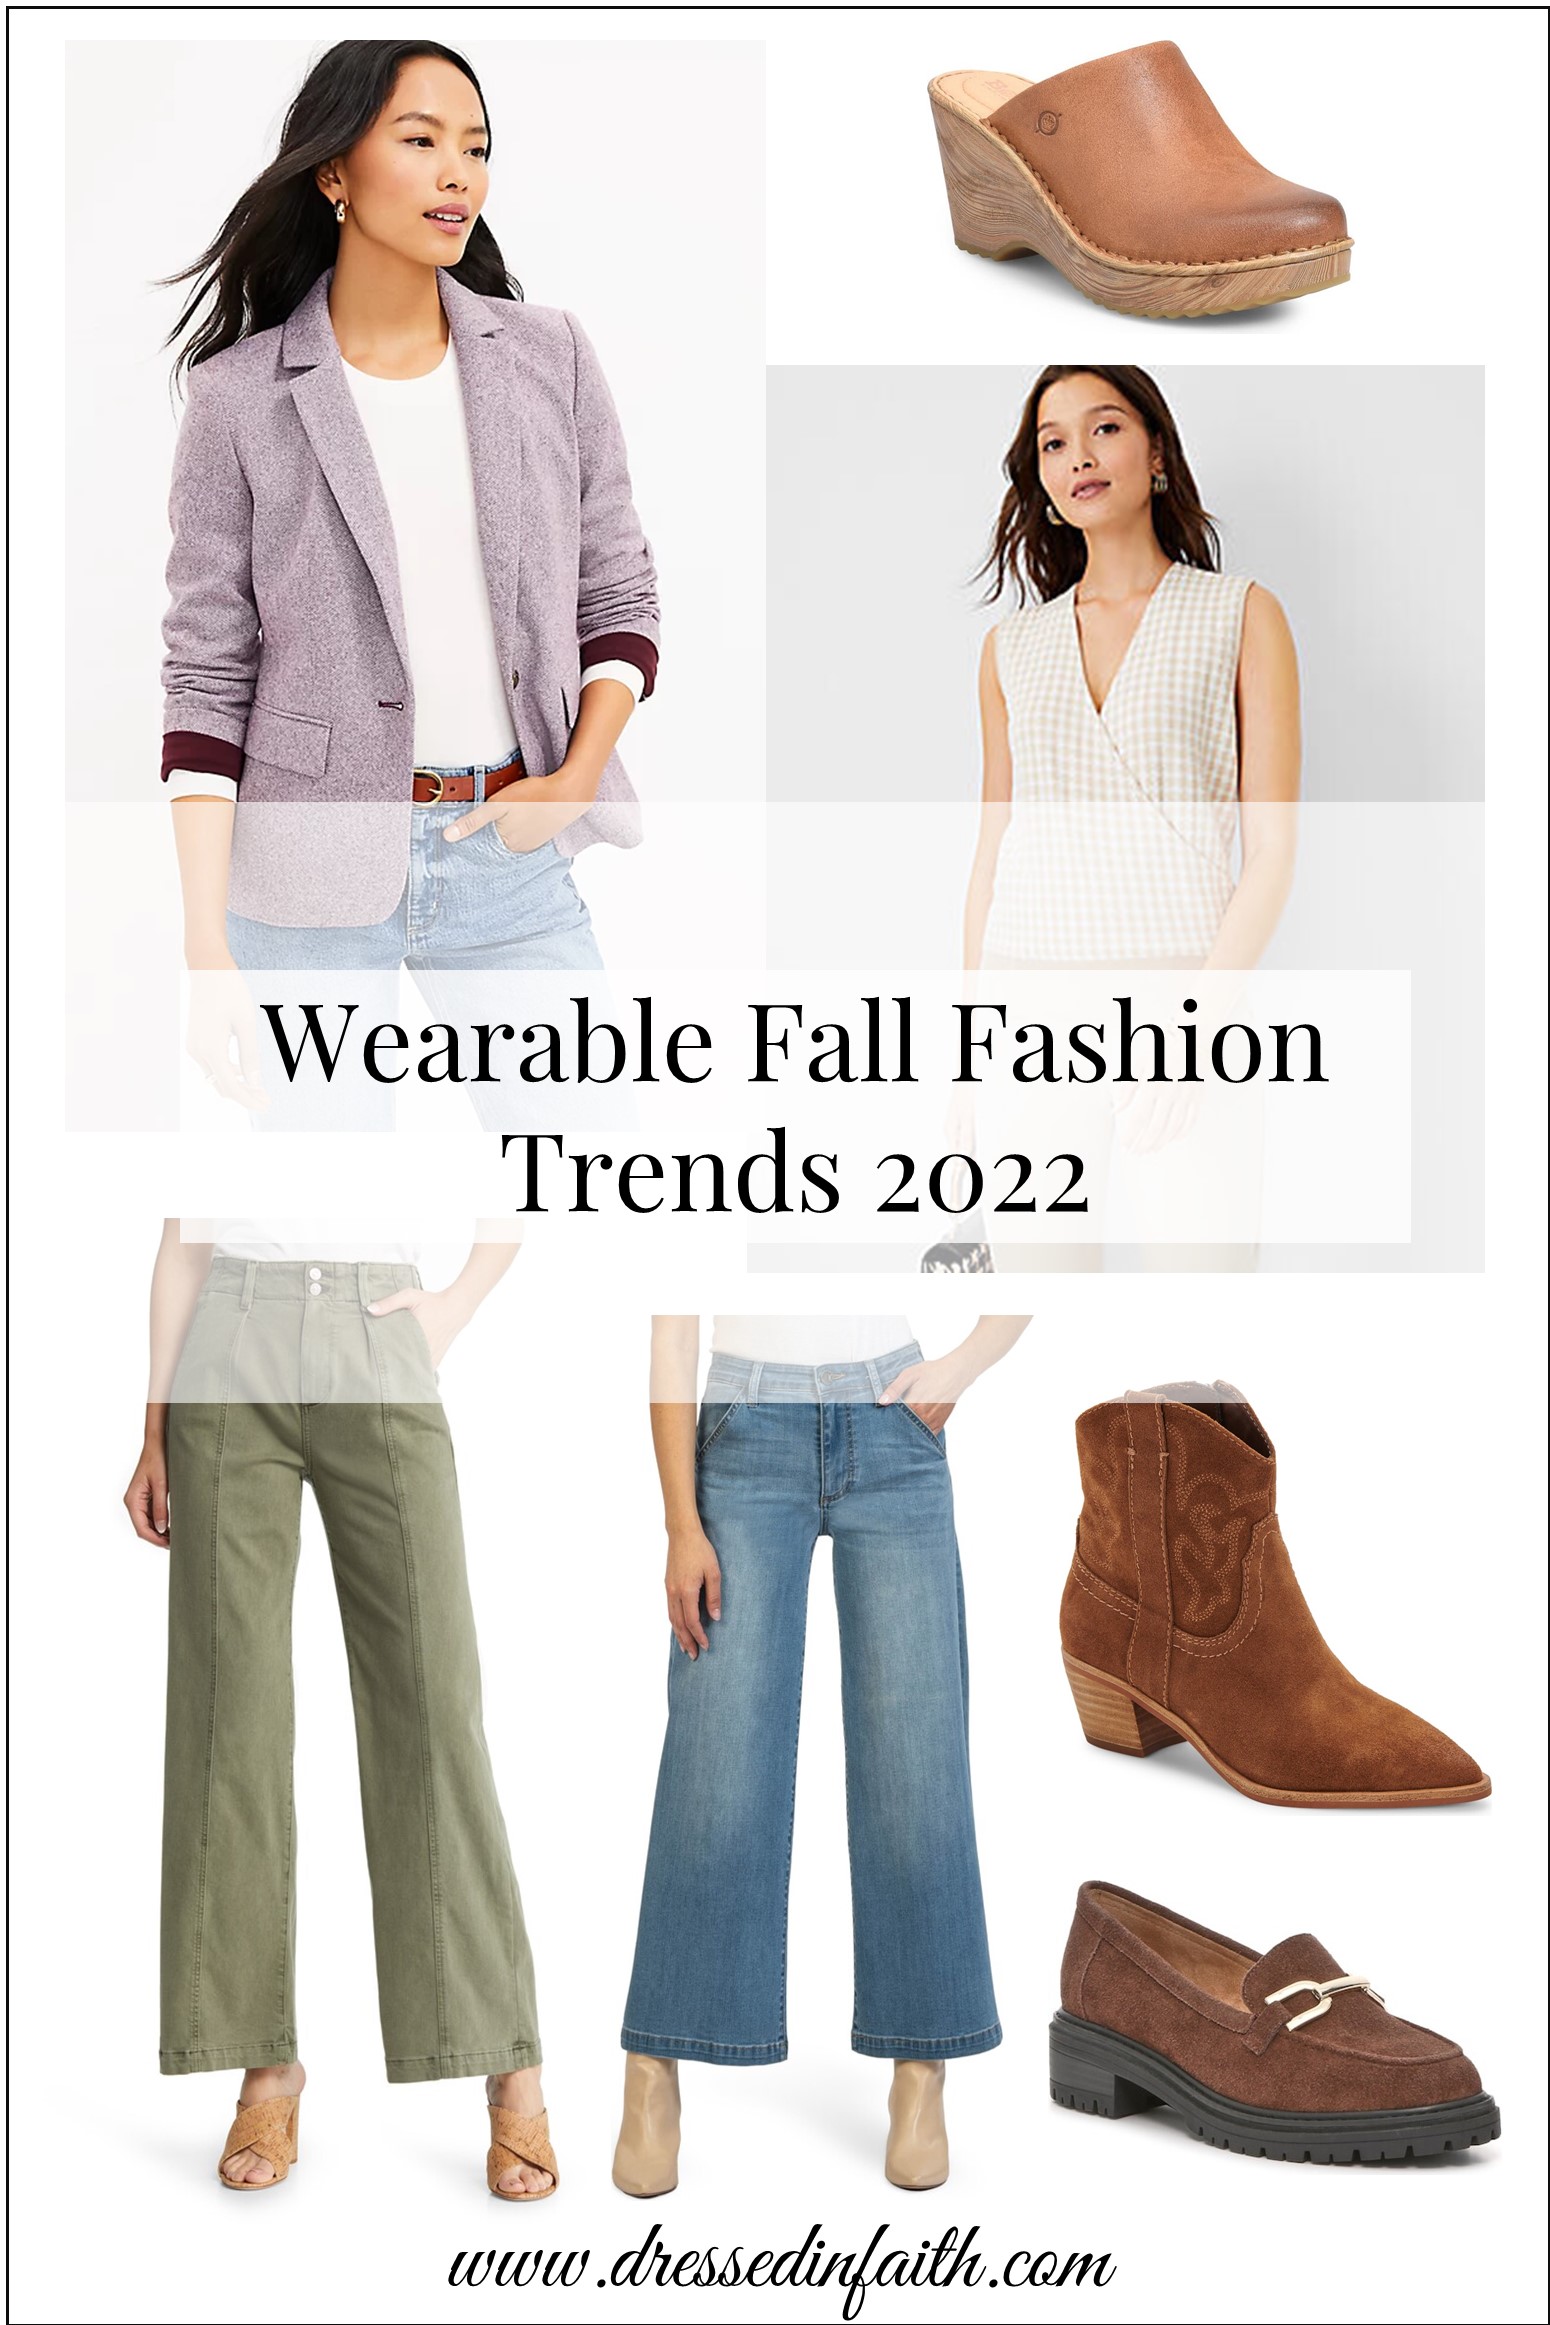 2022 Fashion: Trends That Will Be Popular This Year